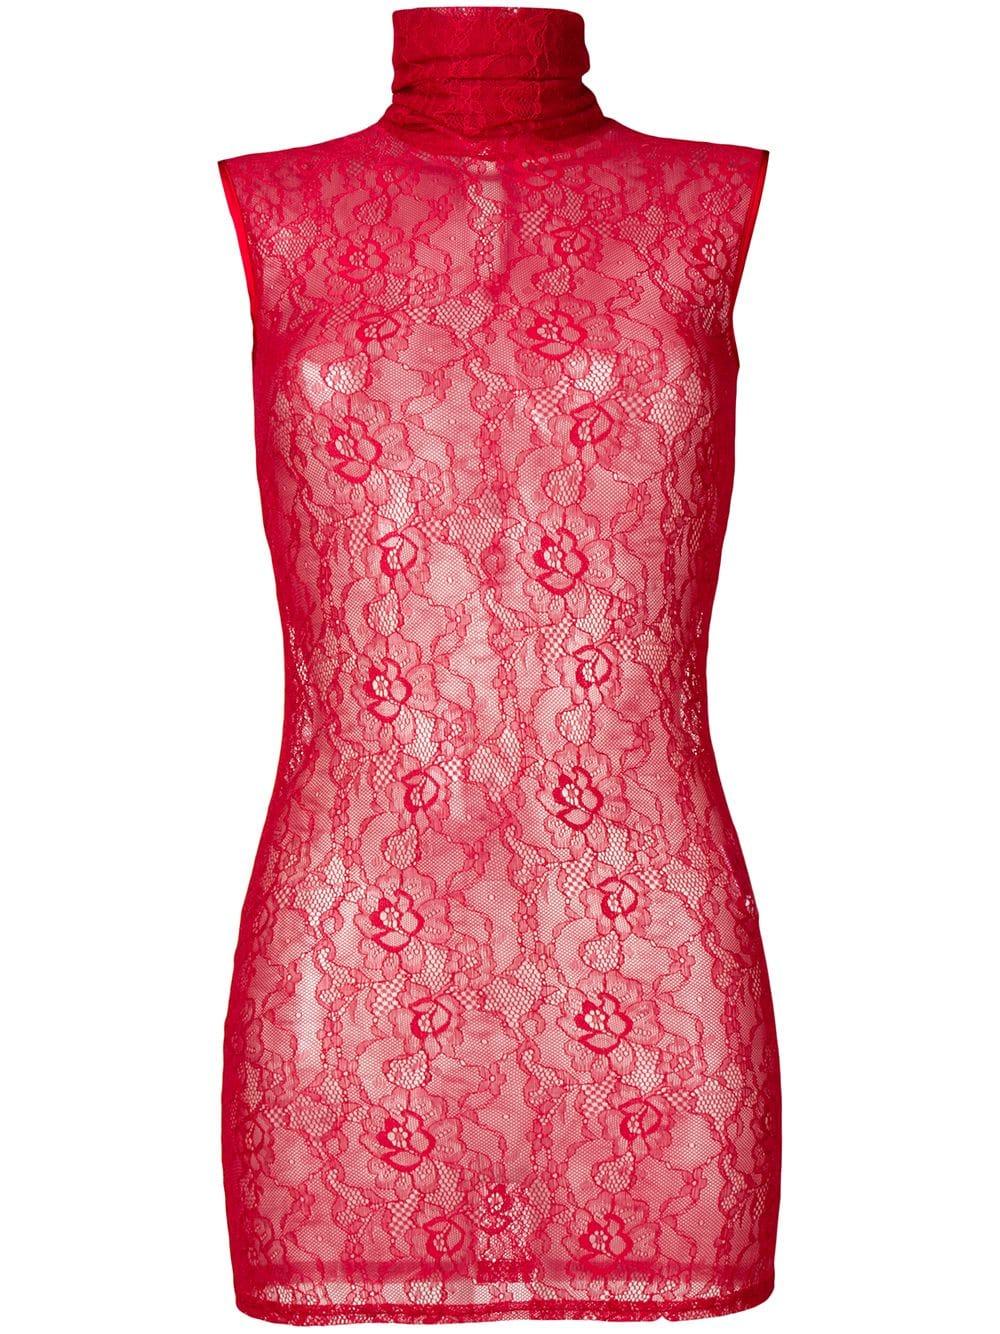 Styland Lace Turtleneck Top in Red - Lyst